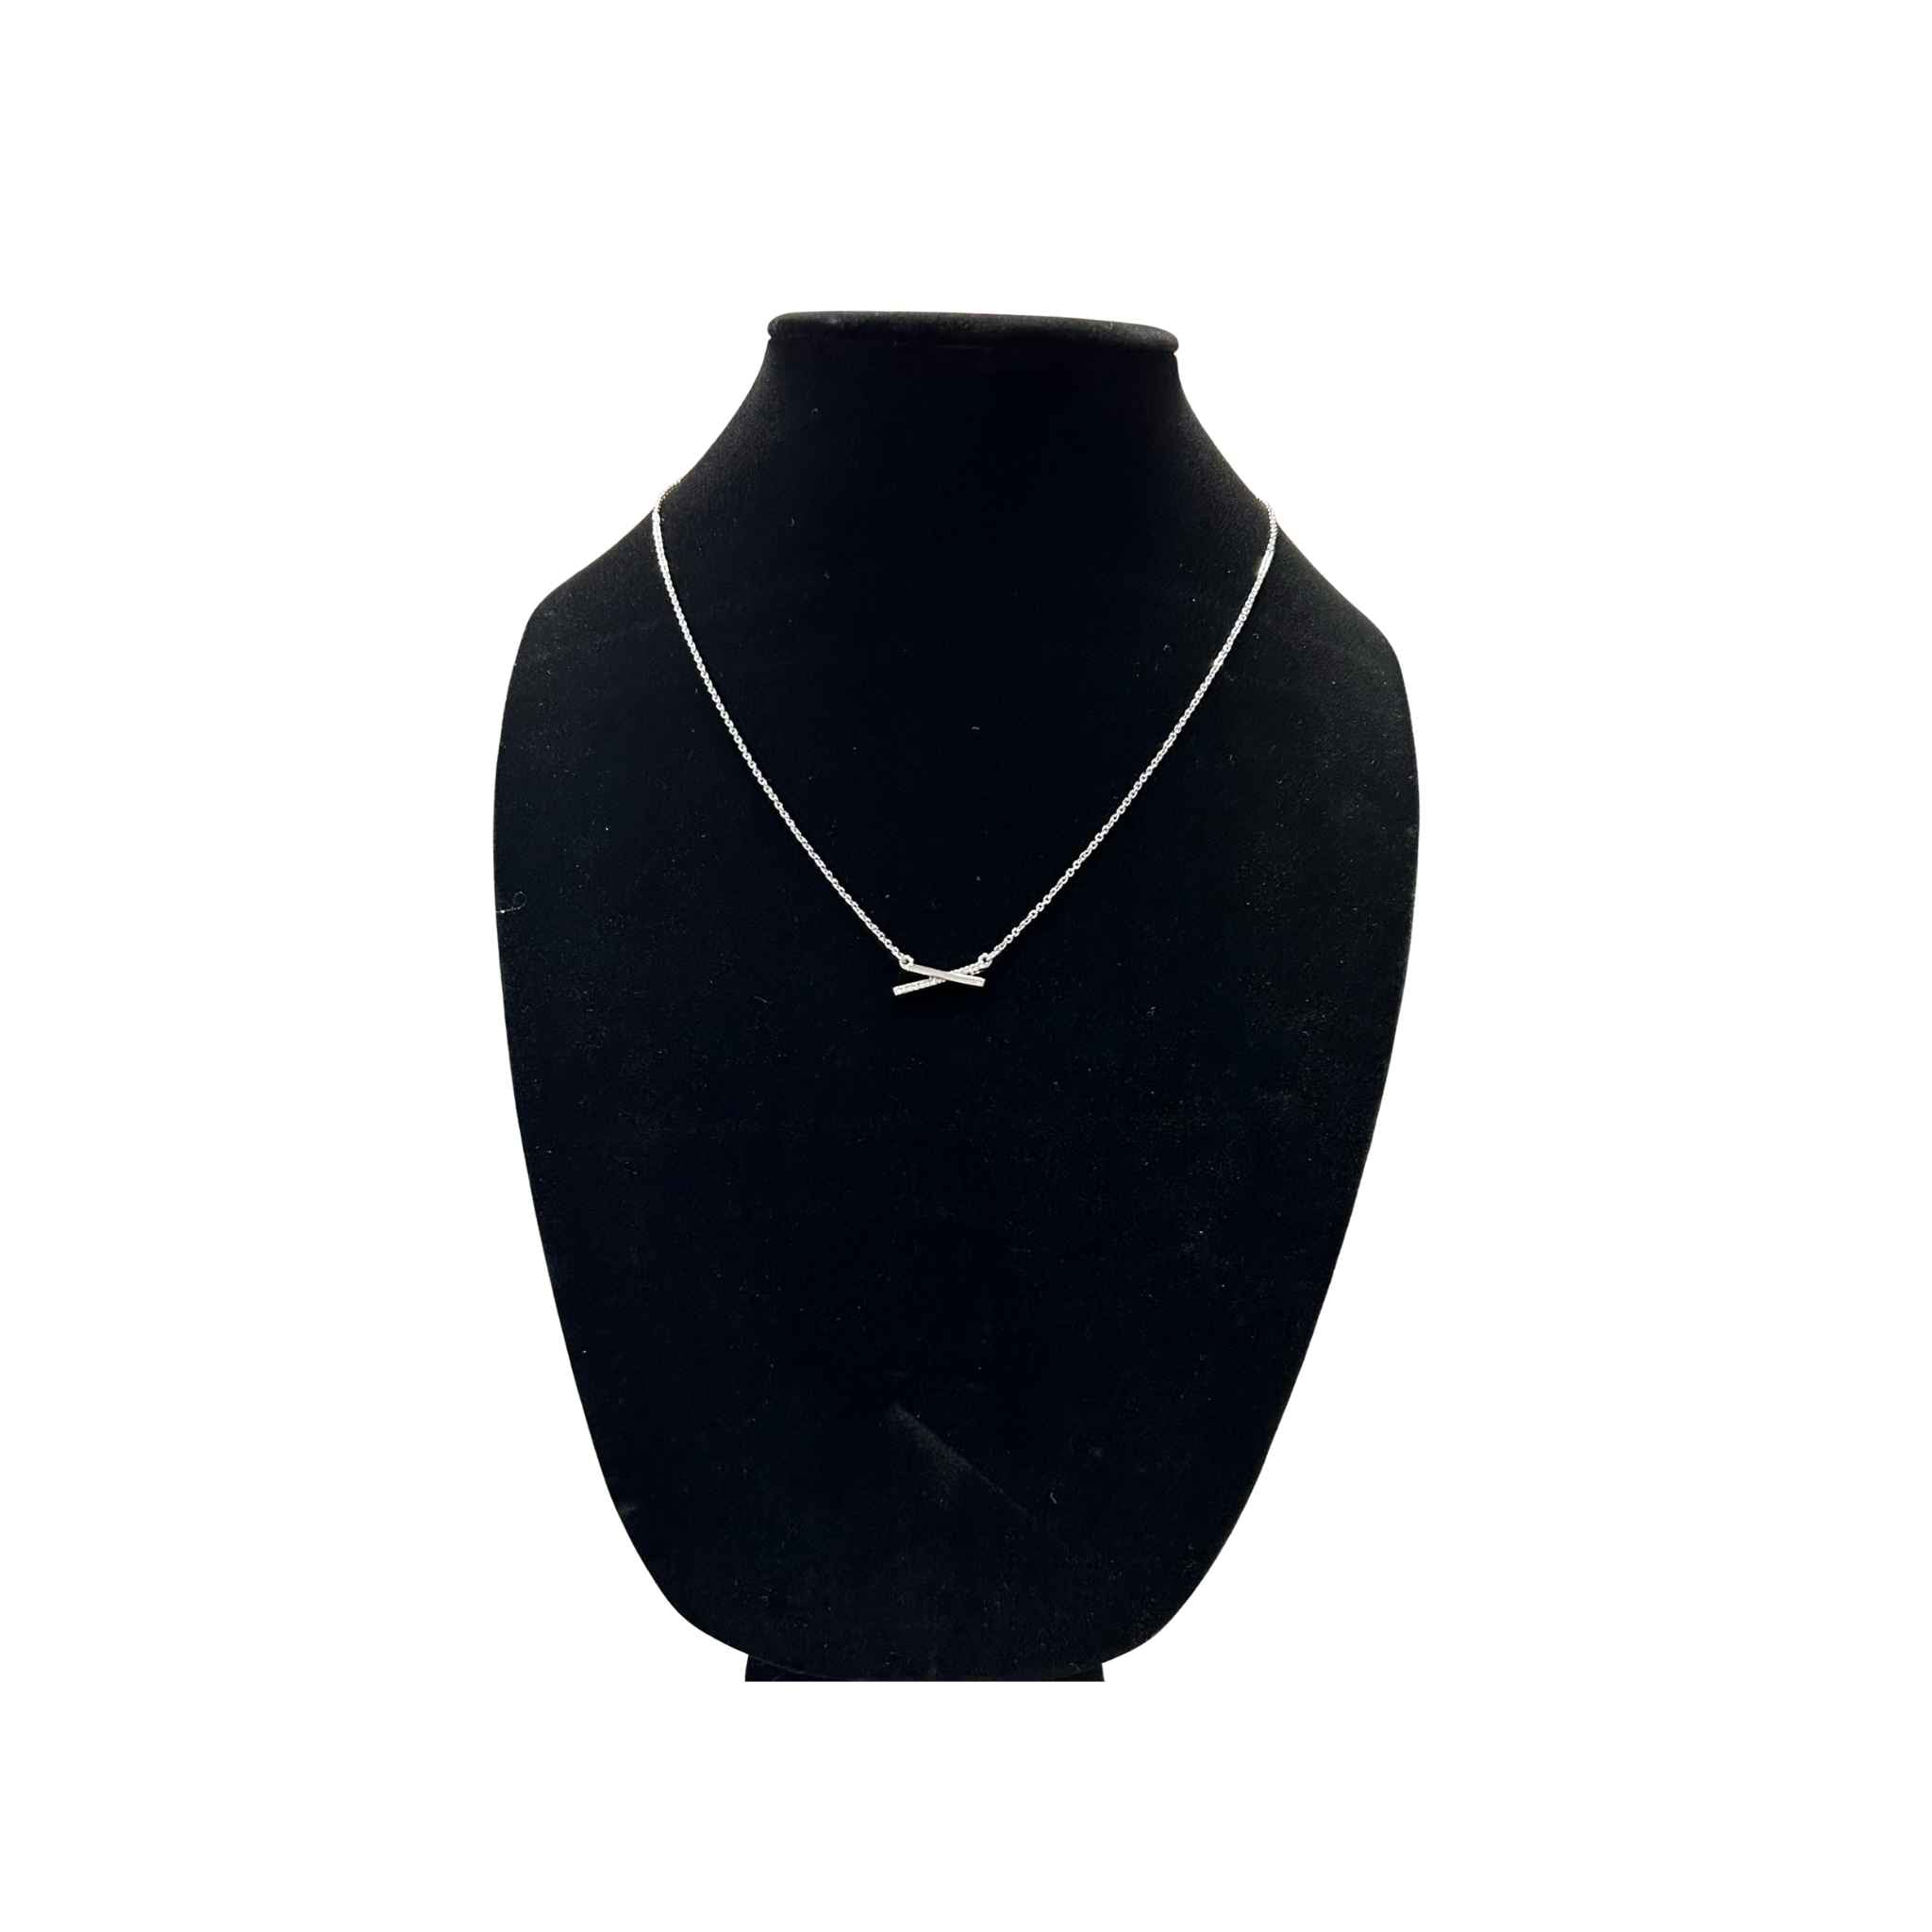 Silver Criss-Cross Necklace